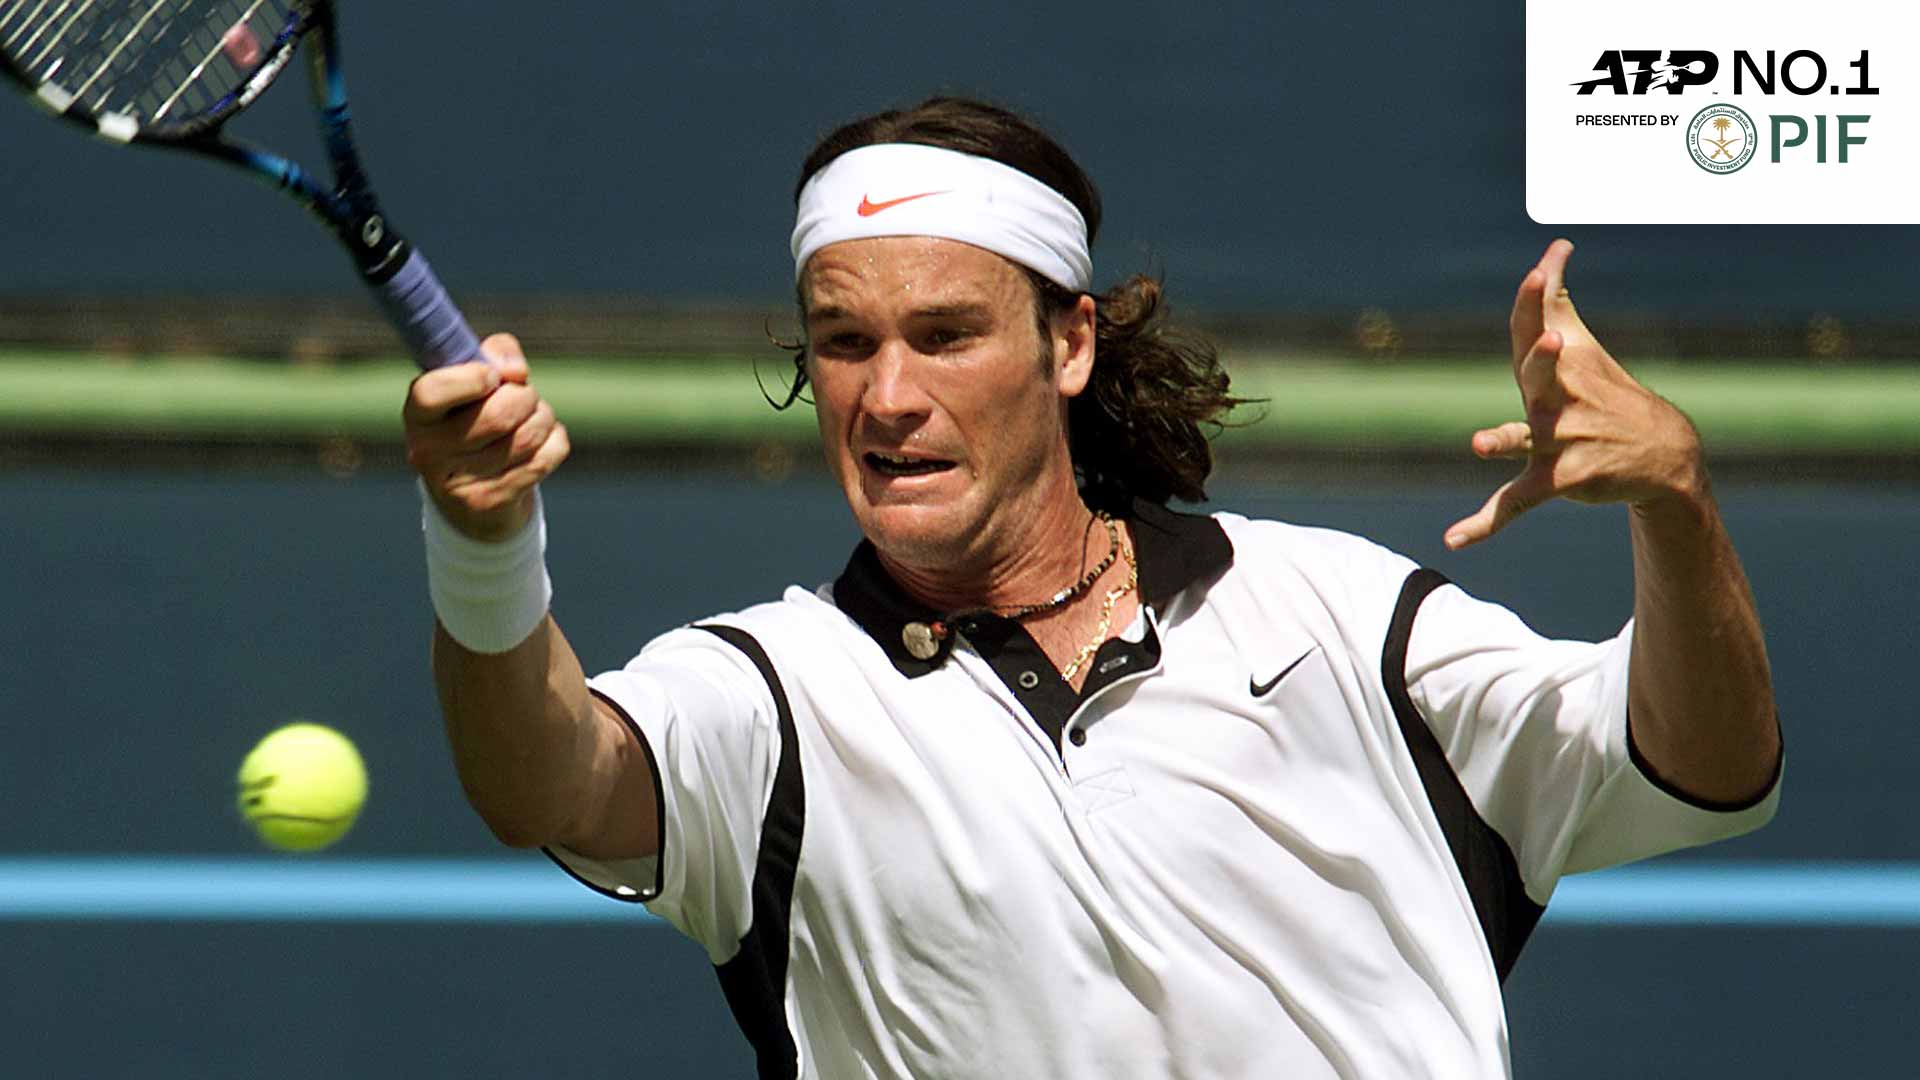 Carlos Moya rose to World No. 1 in the PIF ATP Rankings for the first time after the 1999 BNP Paribas Open, where he reached the final.